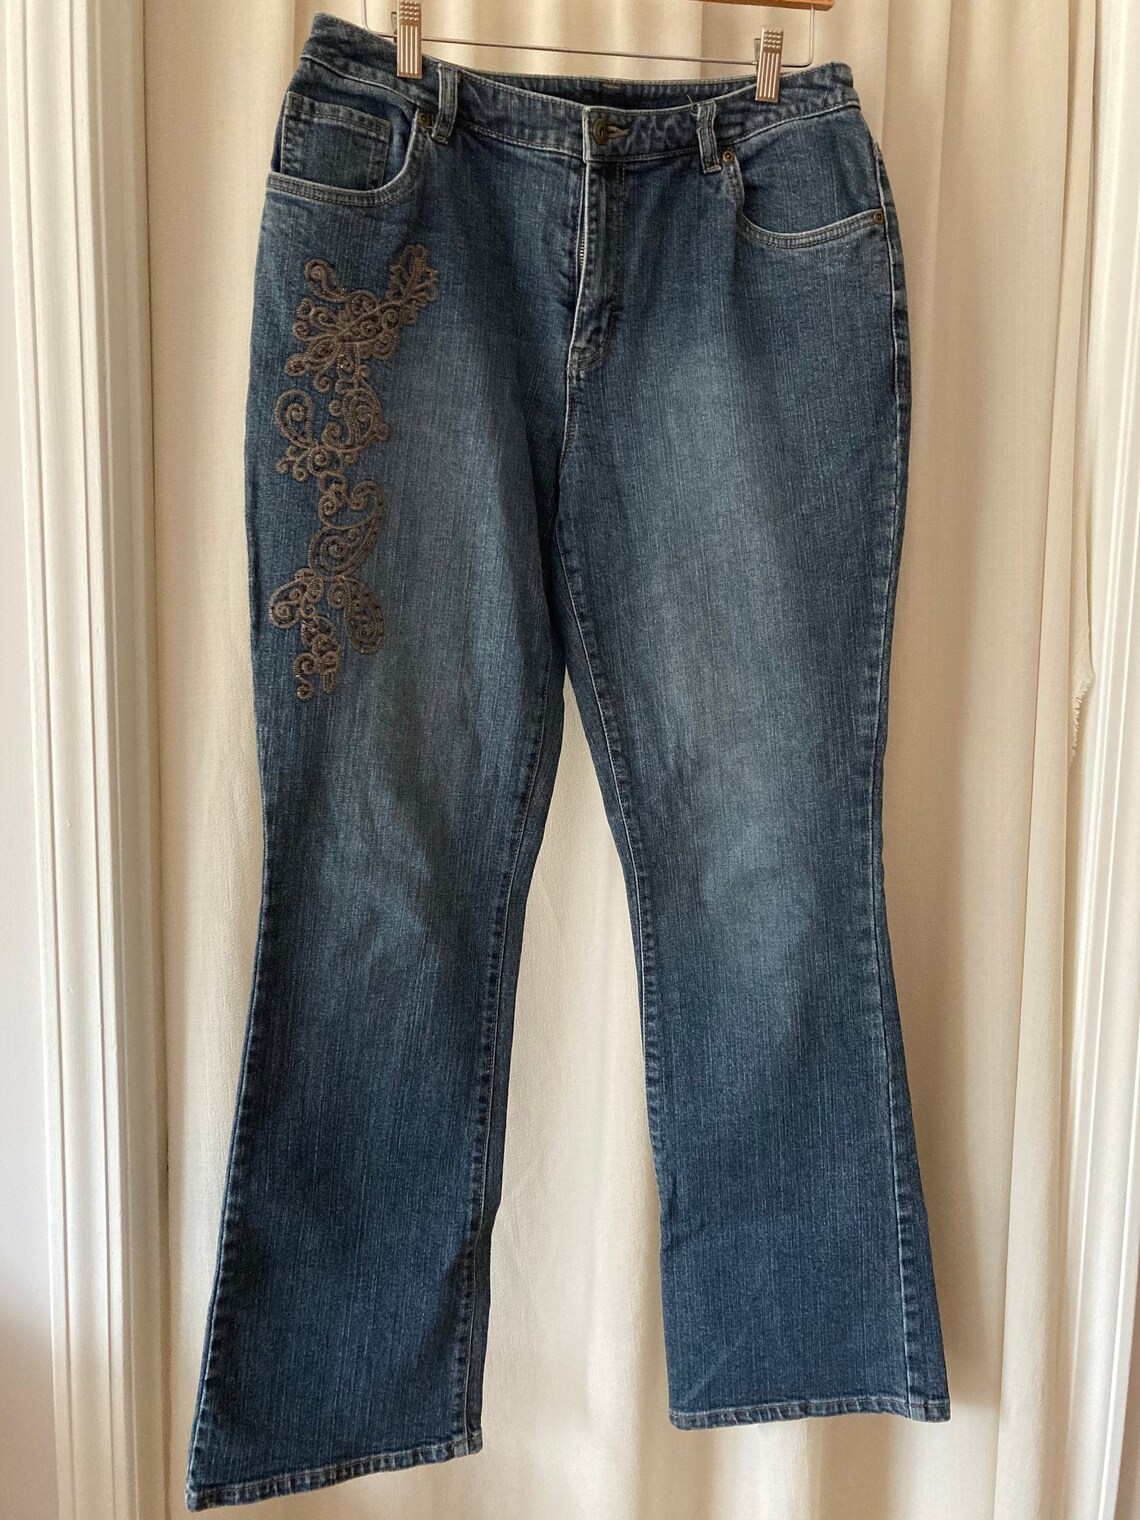 2000s Vintage Motto Bootcut Jeans Y2K Aesthetic Paisley | Etsy